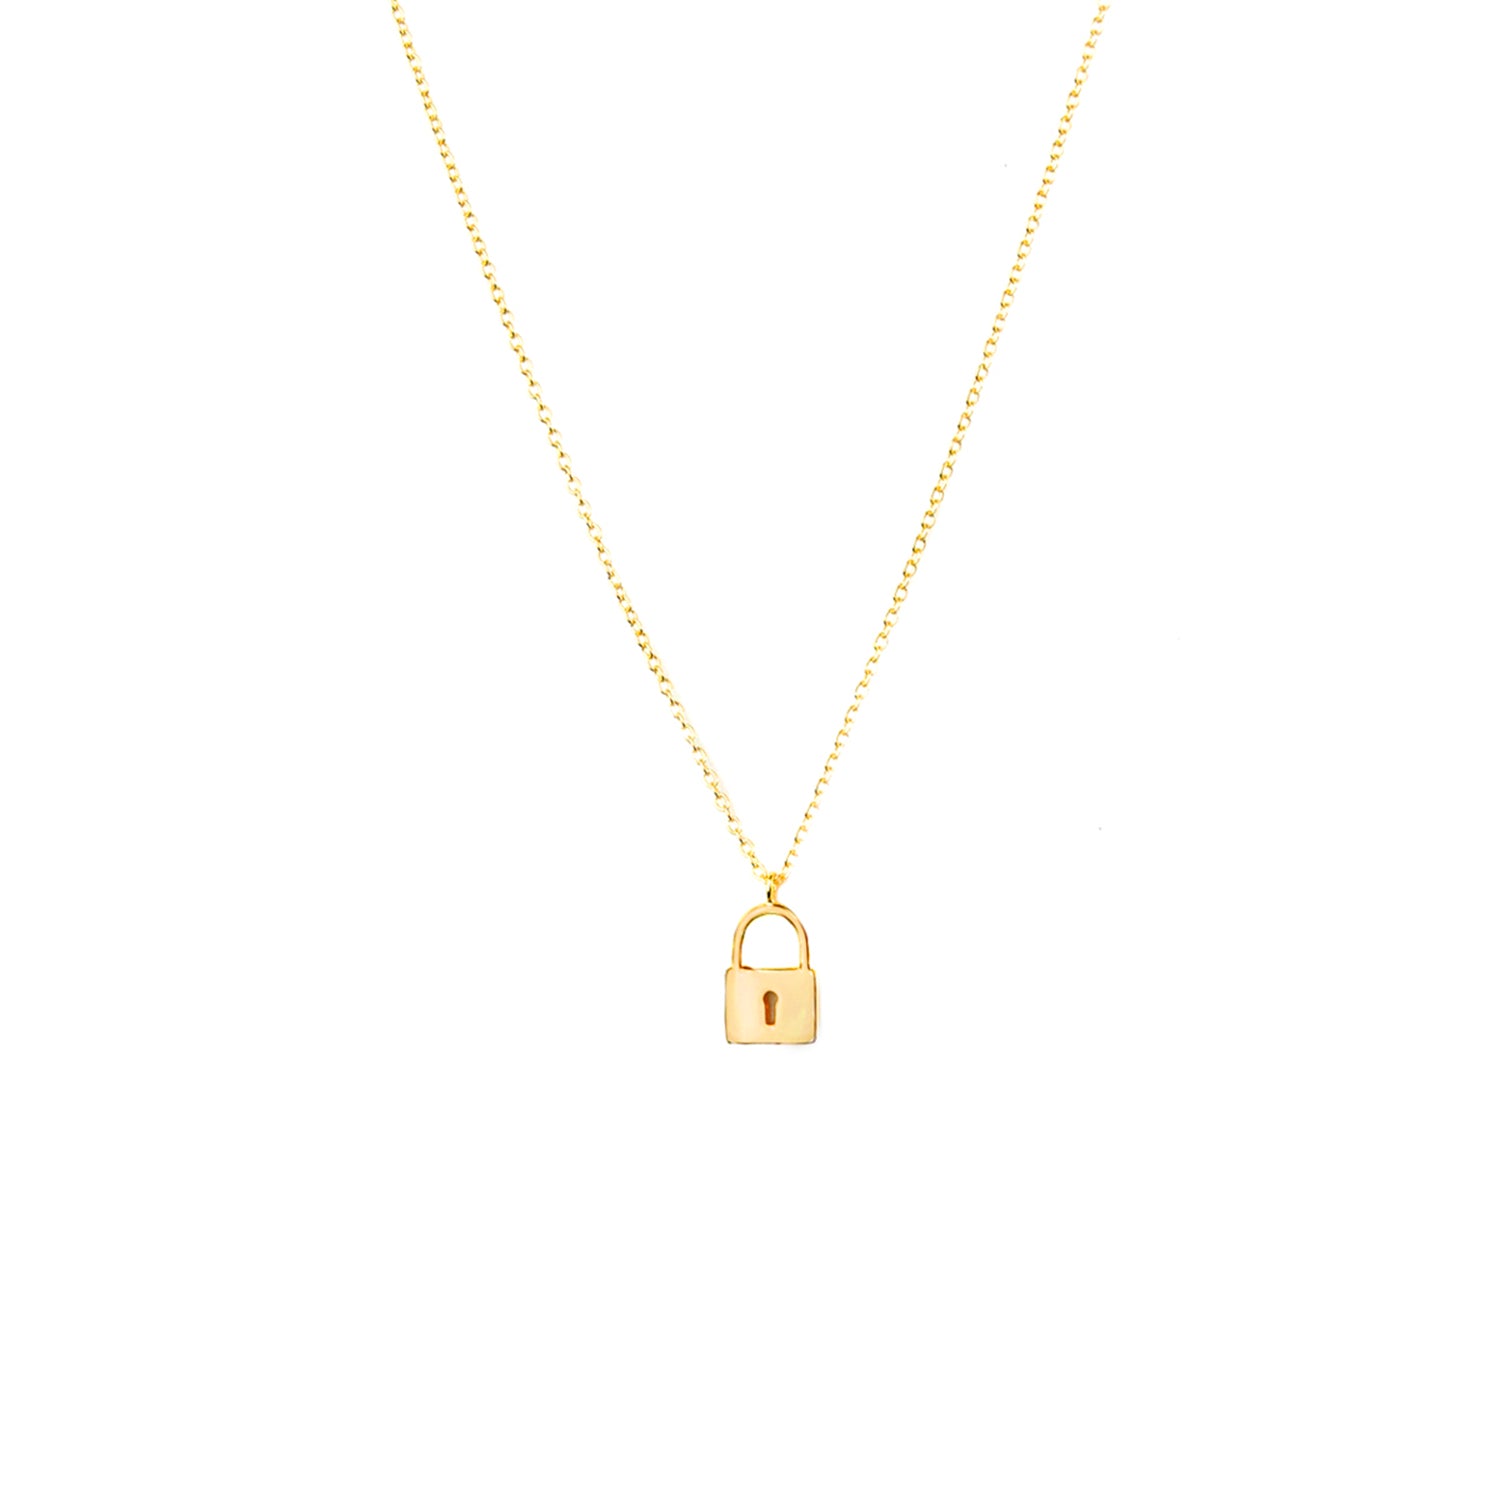 sterling lock necklace